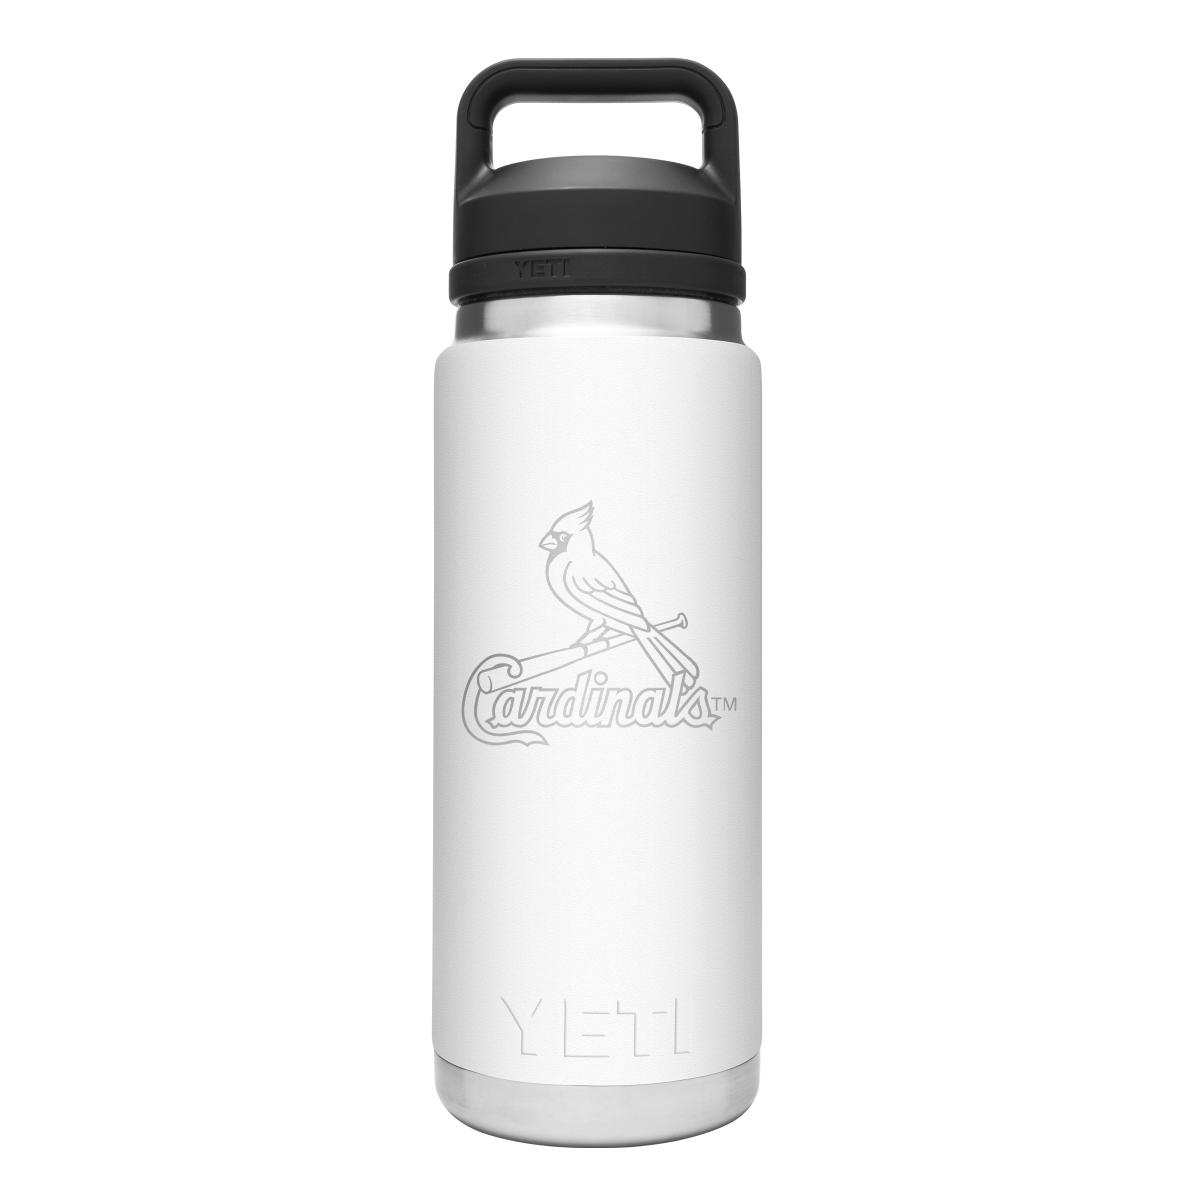 Officially Licensed St Louis Cardinals Coolers By YETI